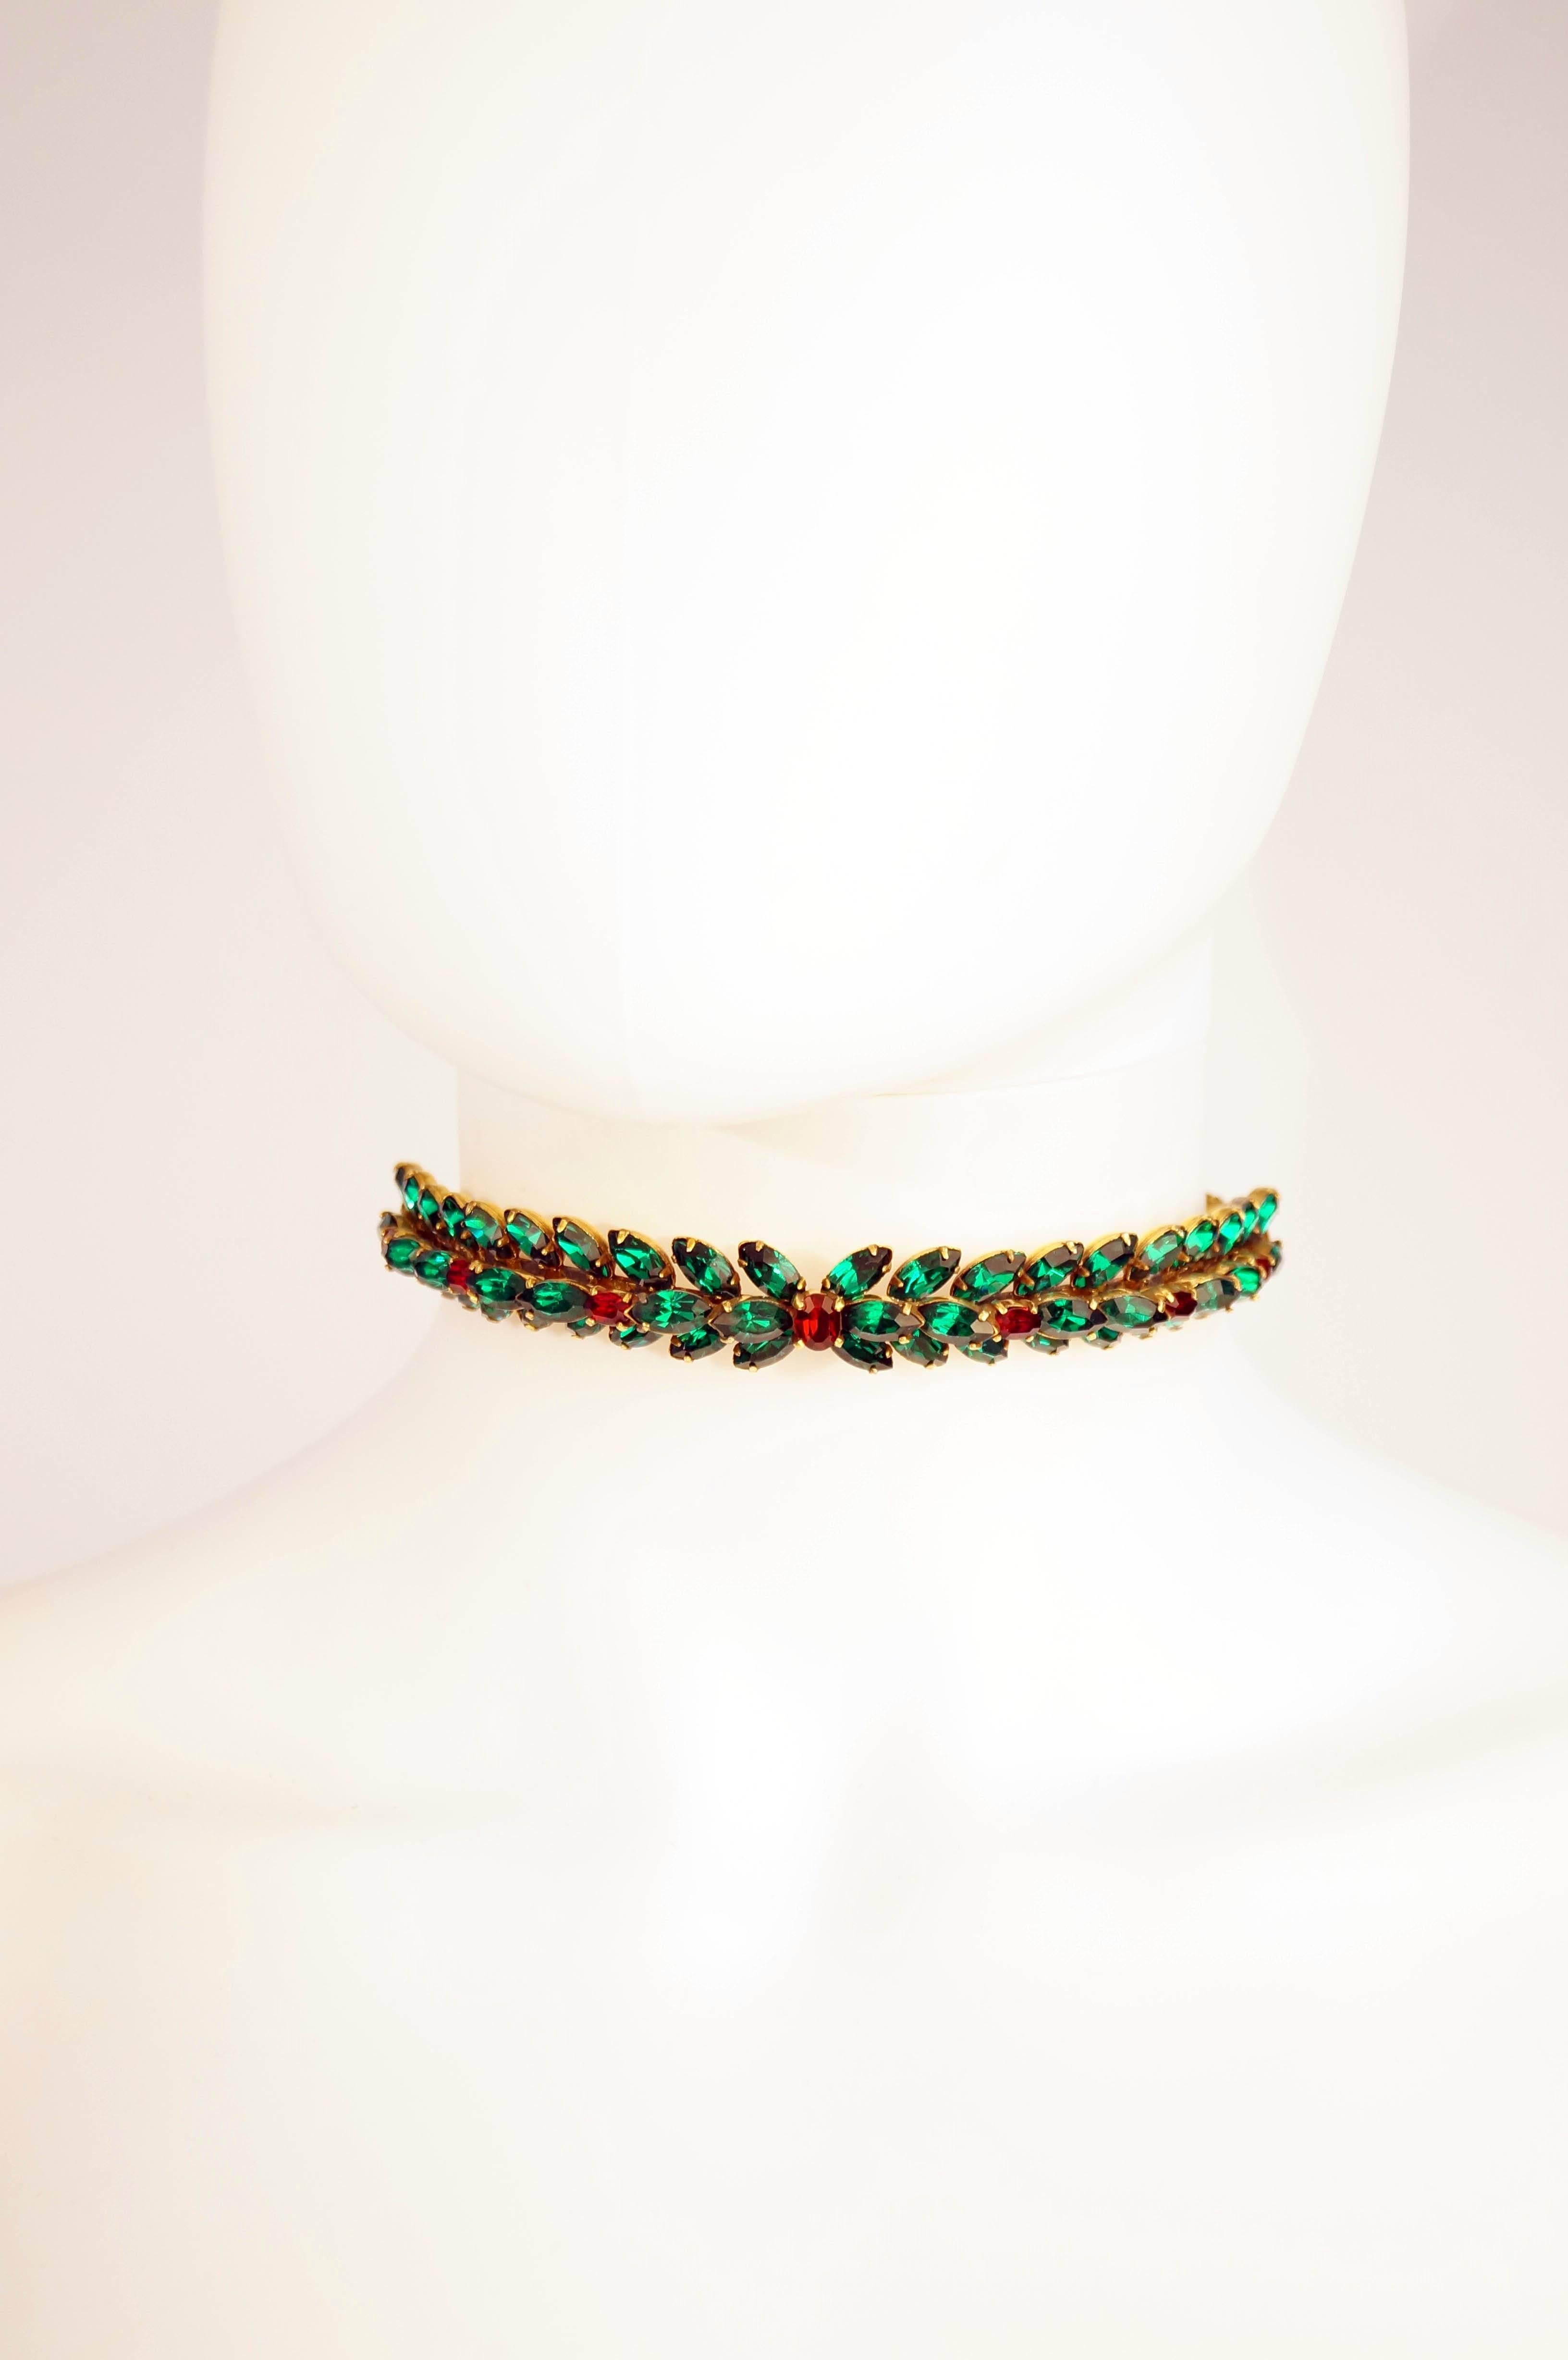 
Absolutely gorgeous stiff front choker necklace composed of a center strip of green marquise cut rhinestones over two strips of marquise cut rhinestones facing inwards in a  chevron-like fashion. The center strip of green rhinestones is